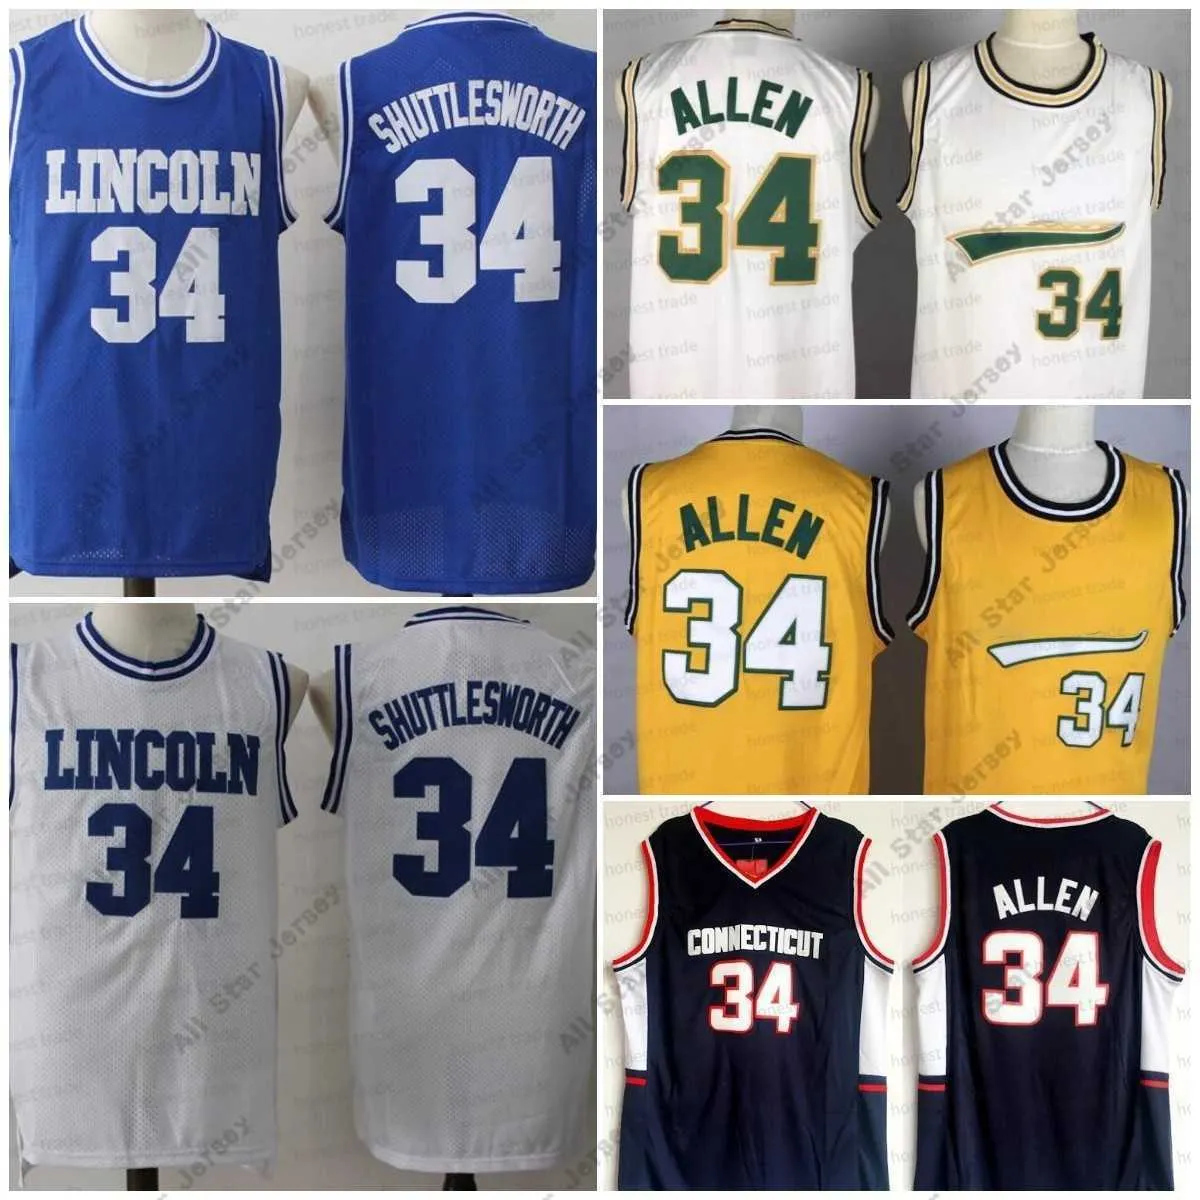 Maillots de basket-ball NCAA Uconn Connecticut Huskies 34 Ray Allen Hommes Basketball College Maillots Film Lincoln 34 Jesus Shuttlesworth Jersey